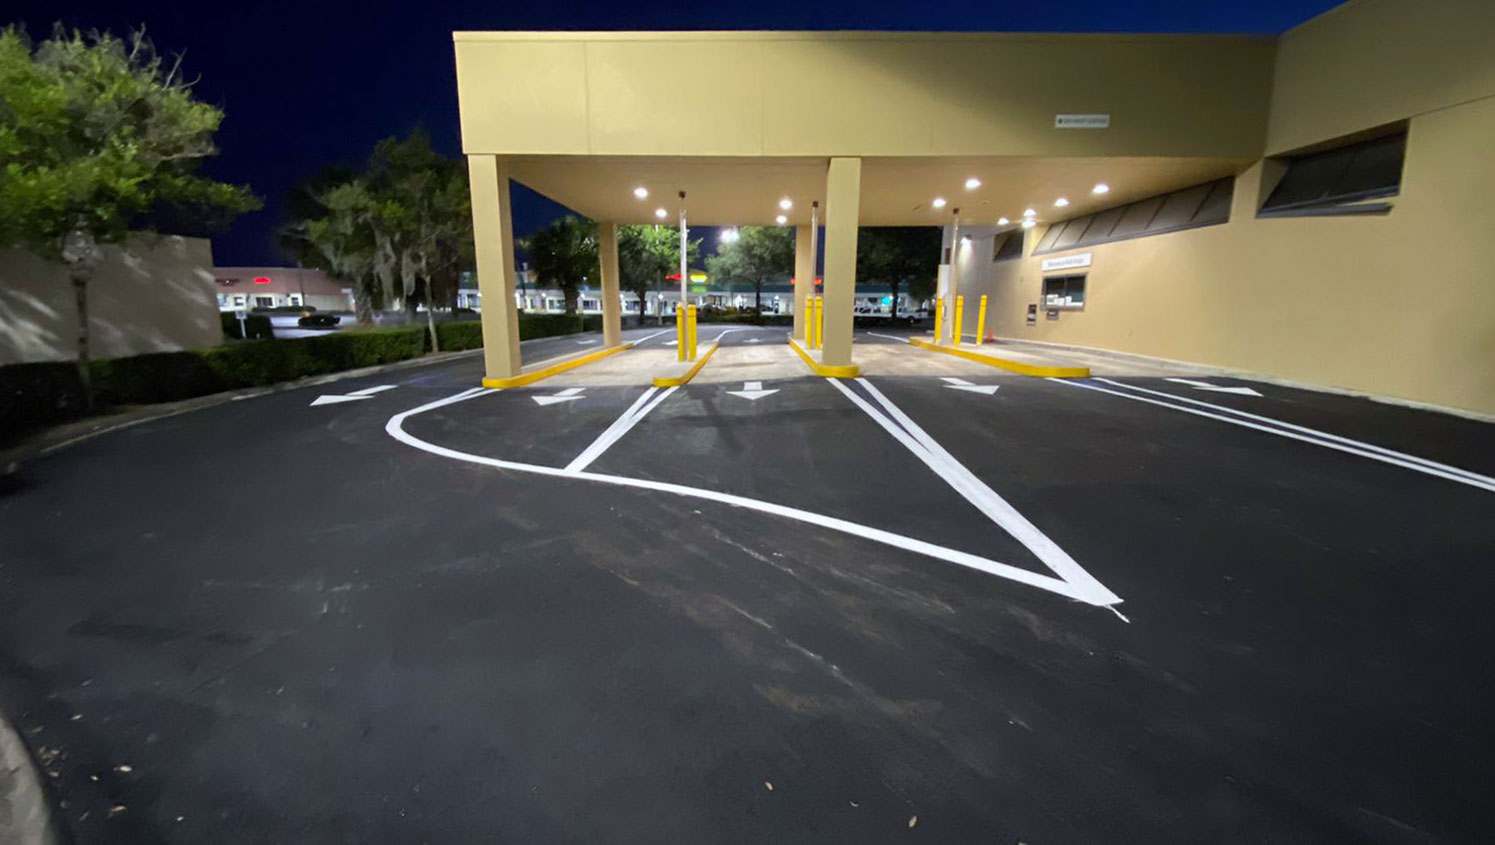 updated banking drive-thru exit lines and arrows at Wells Fargo in Sun City Center, FL